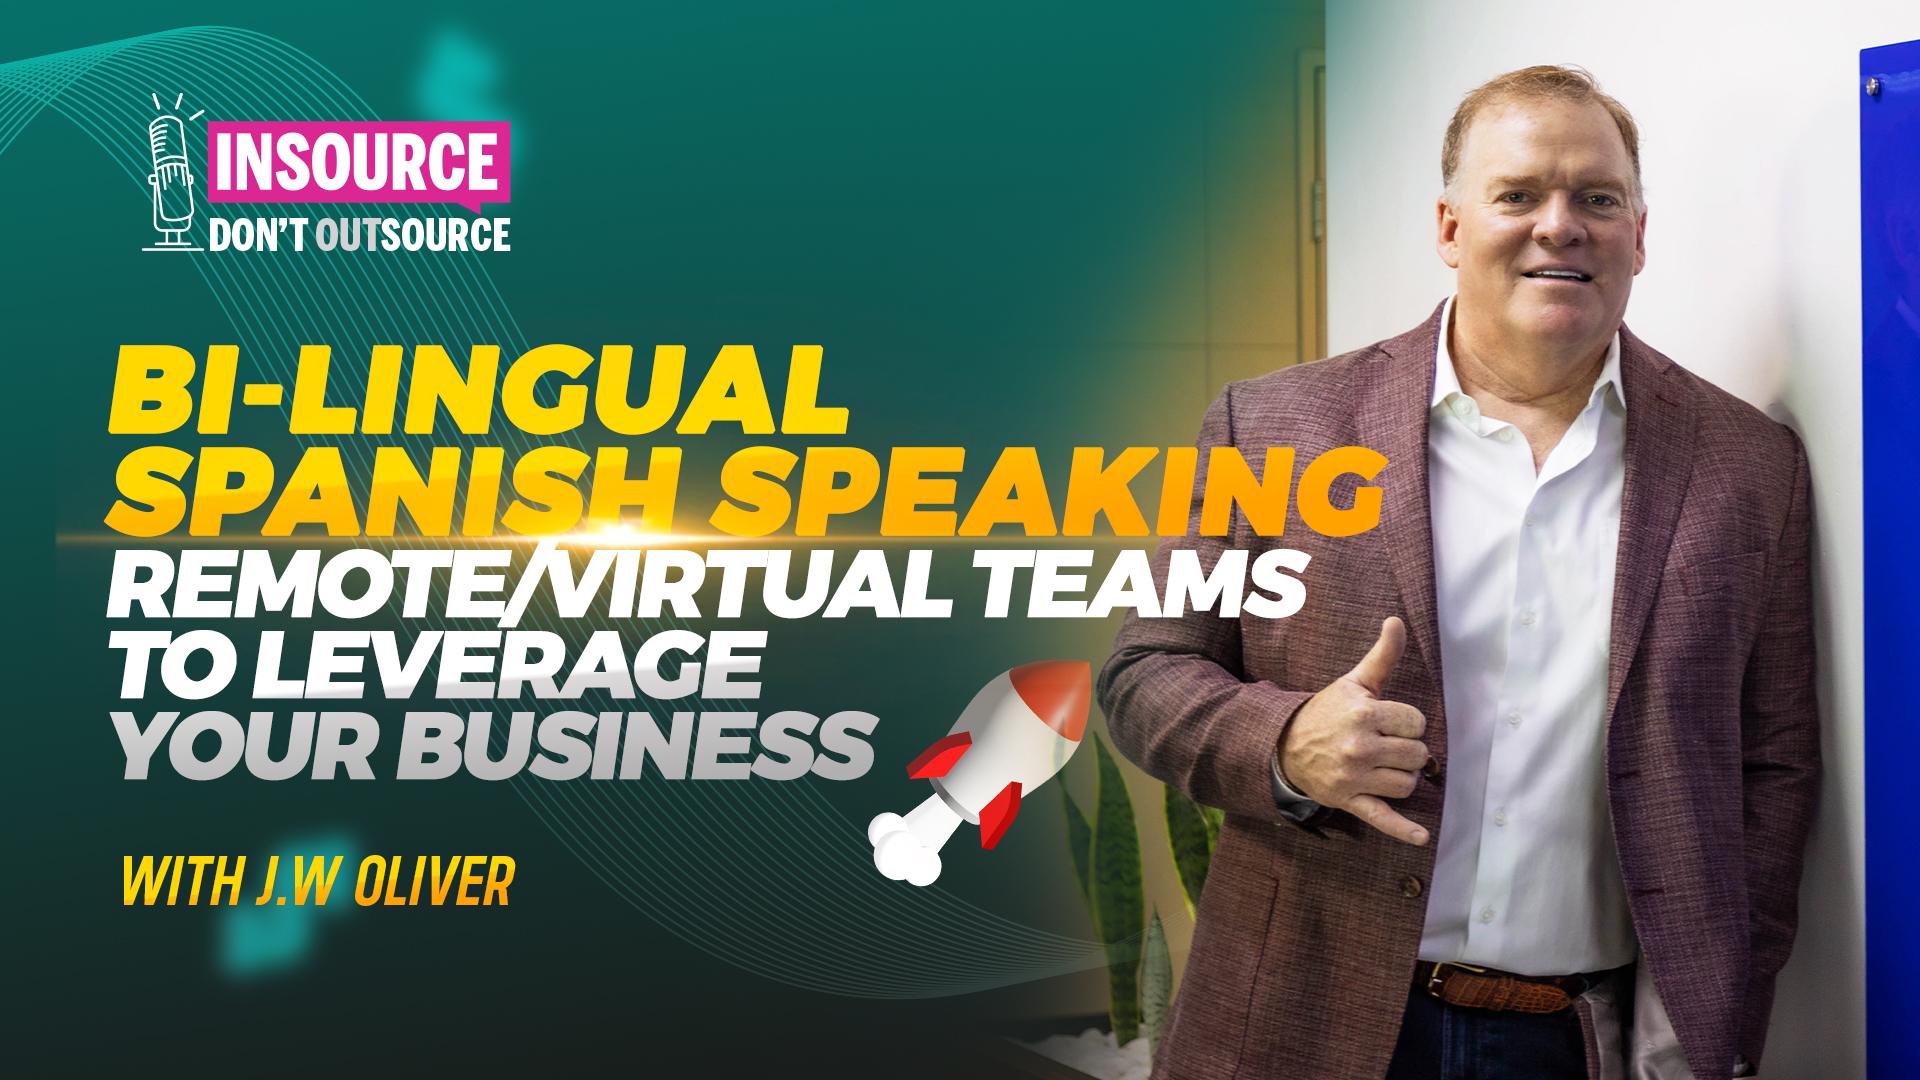 Episode 24 | Bi-Lingual Spanish Speaking Remote/Virtual Teams to Leverage Your Business